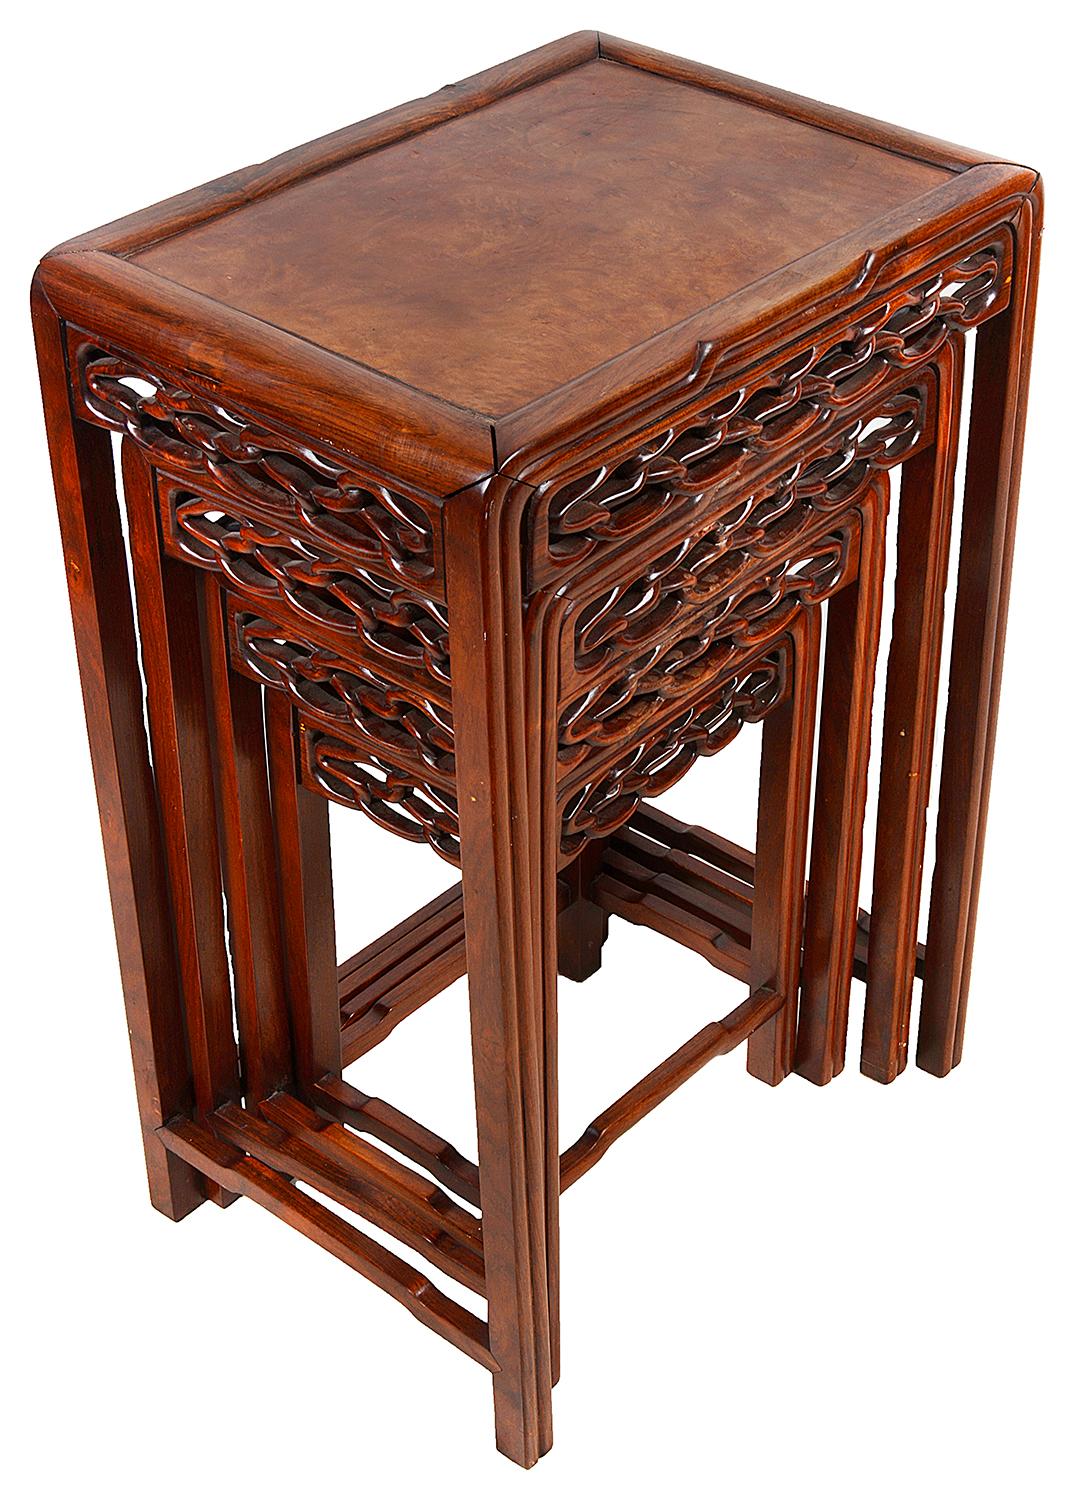 A good quality nest of four classical Chinese nest of tables, each with inset paneled tops, carved and pierced decoration to the frieze, raised on square section legs,united by stretchers.